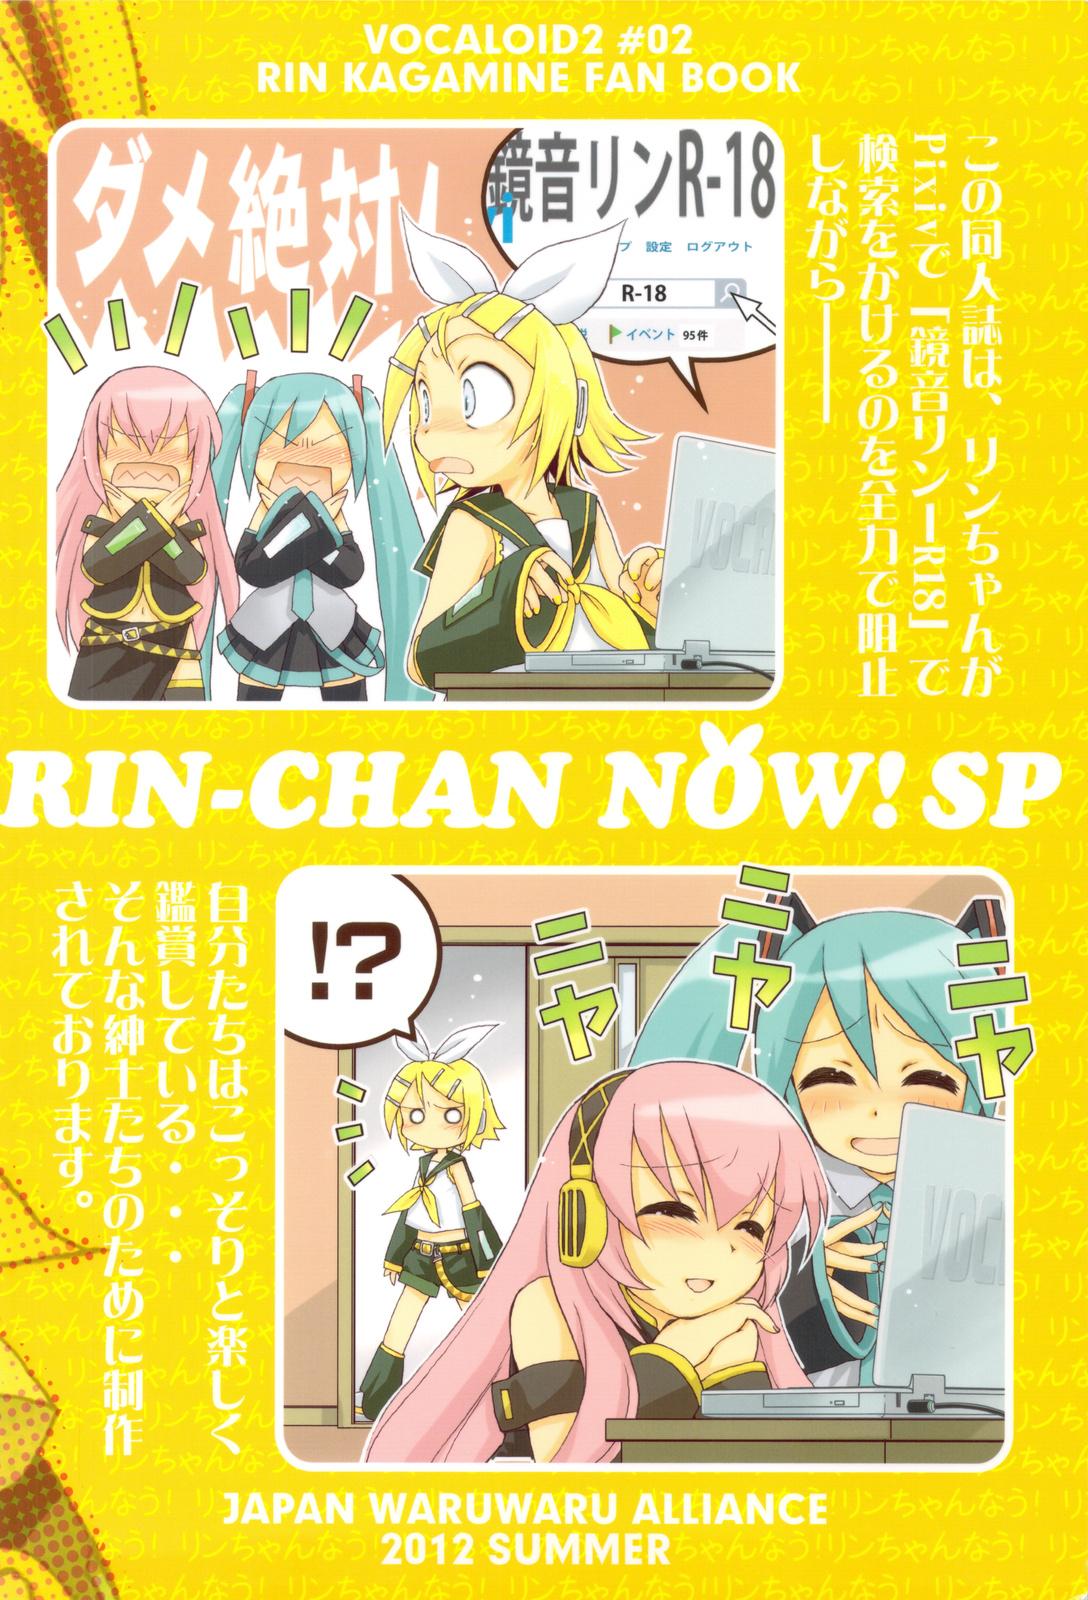 Goth Rin-chan Now! SP - Vocaloid Hardon - Page 24